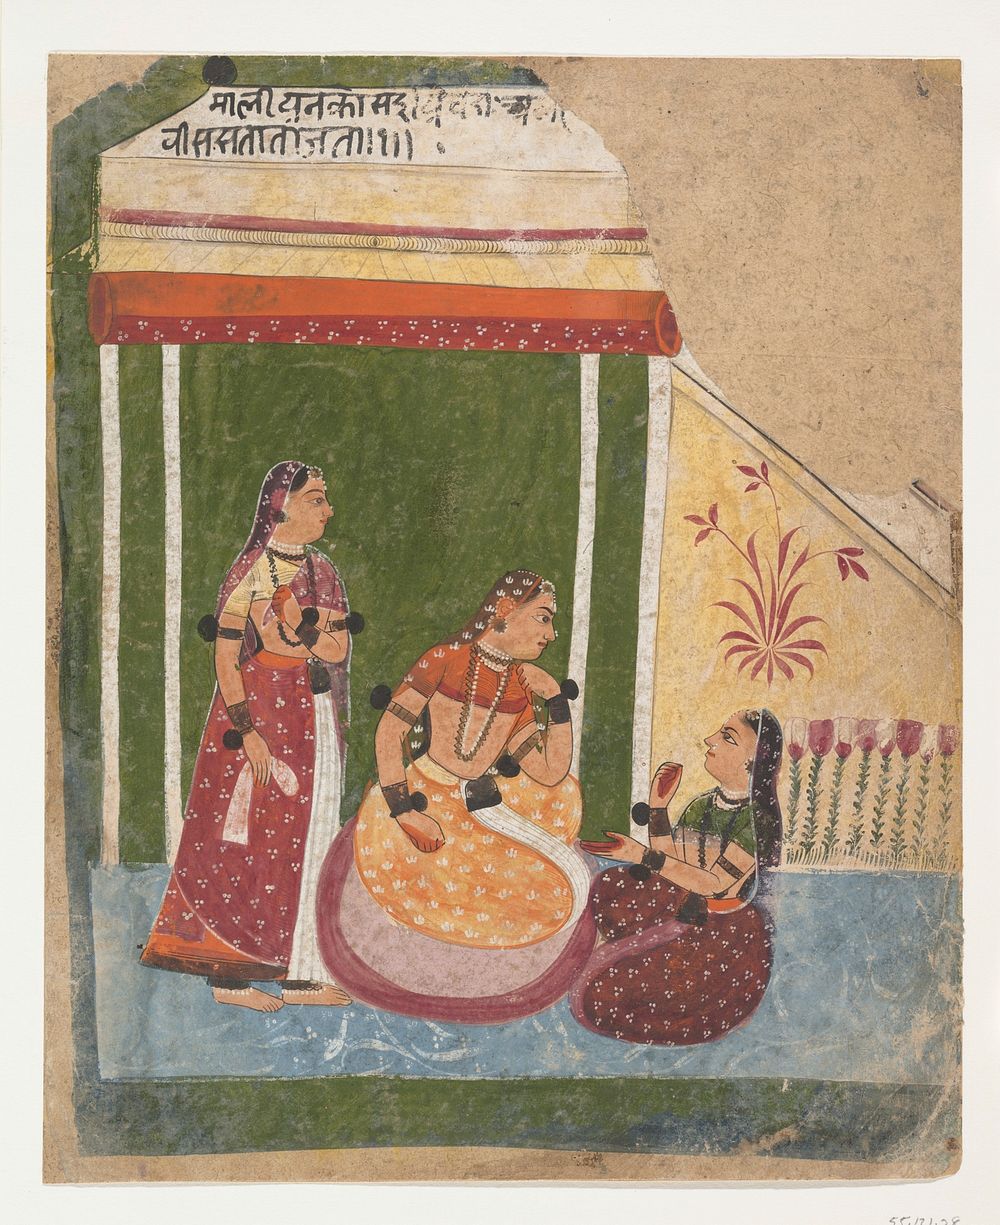 Ladies in a Pavilion: Page from a Dispersed Ragamala Series (Garland of Musical Modes), India (Rajasthan, Marwar)